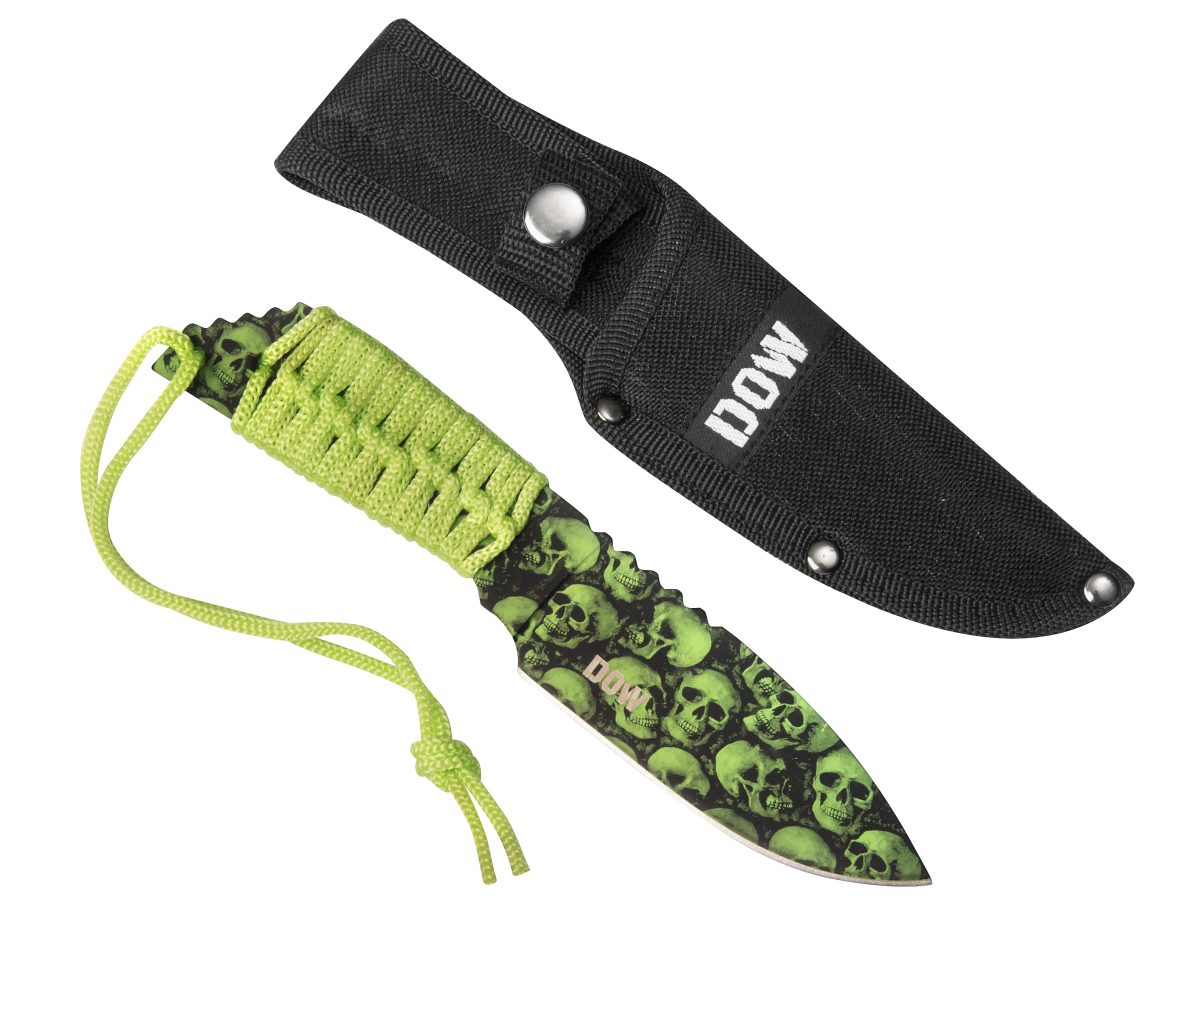 DOW 2265 SKULL KNIFE WITH PARACORD